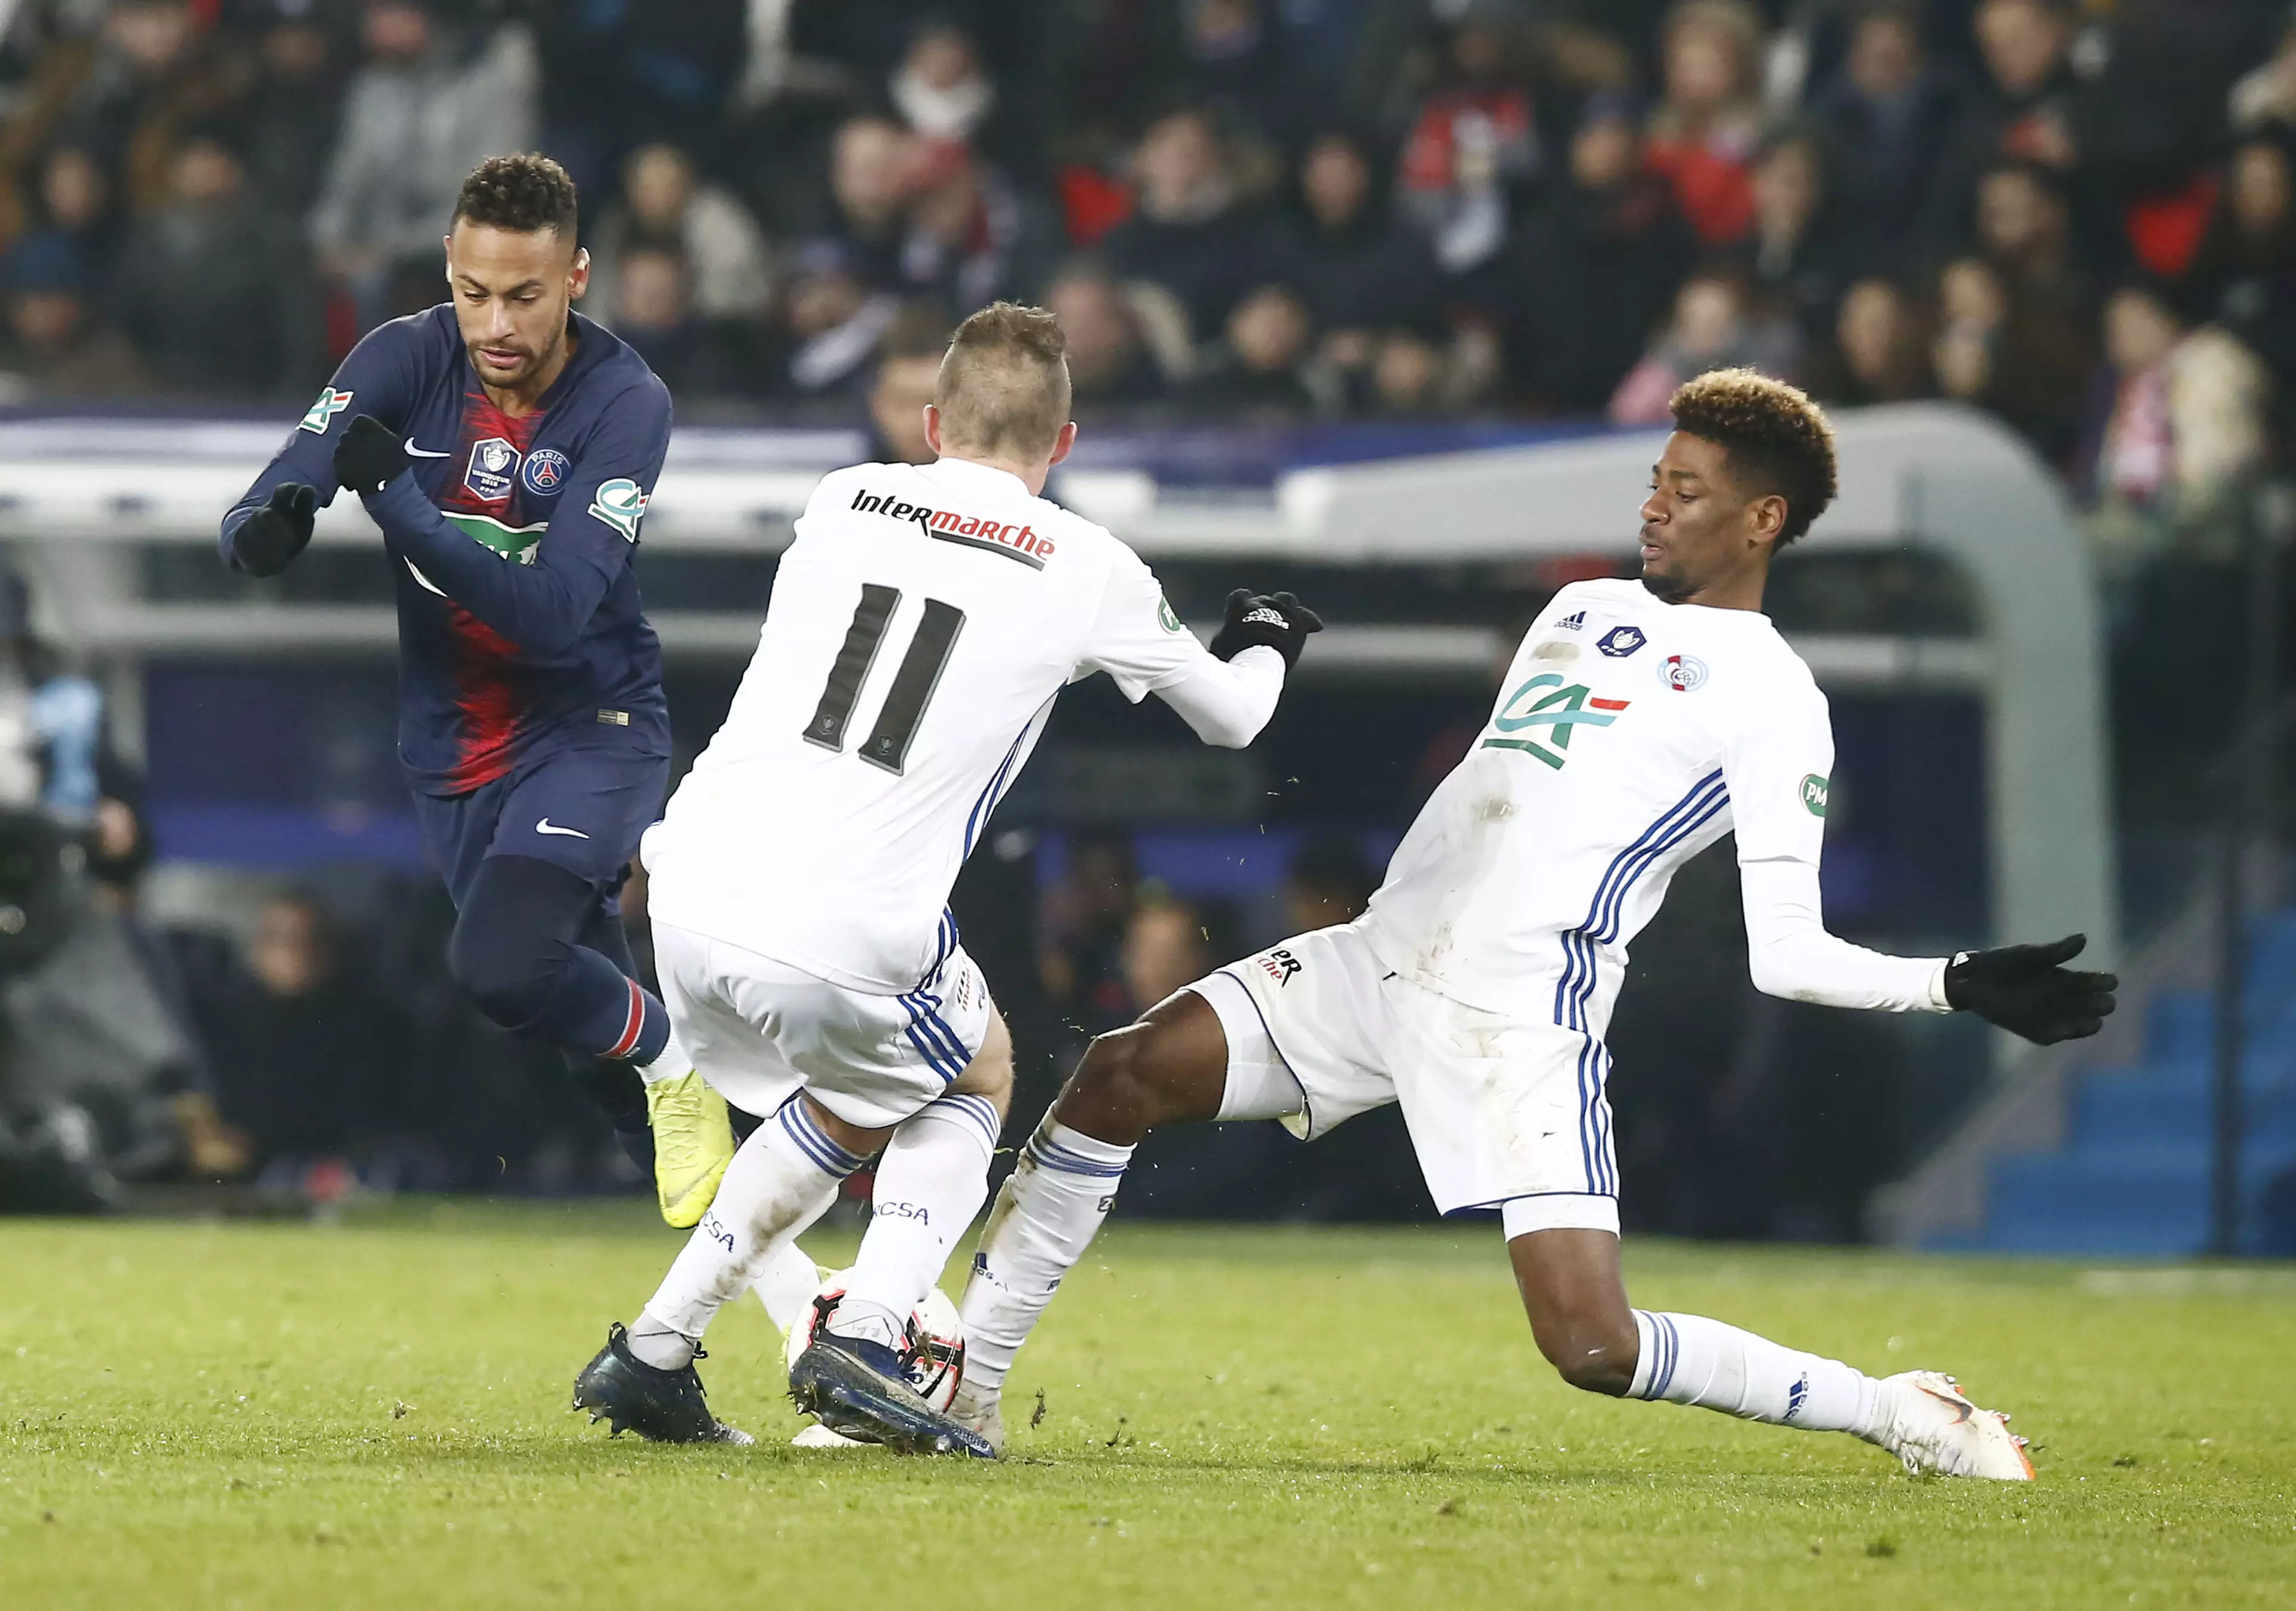 Neymar came in for some rough treatment against Strasbourg. Image: PA Images